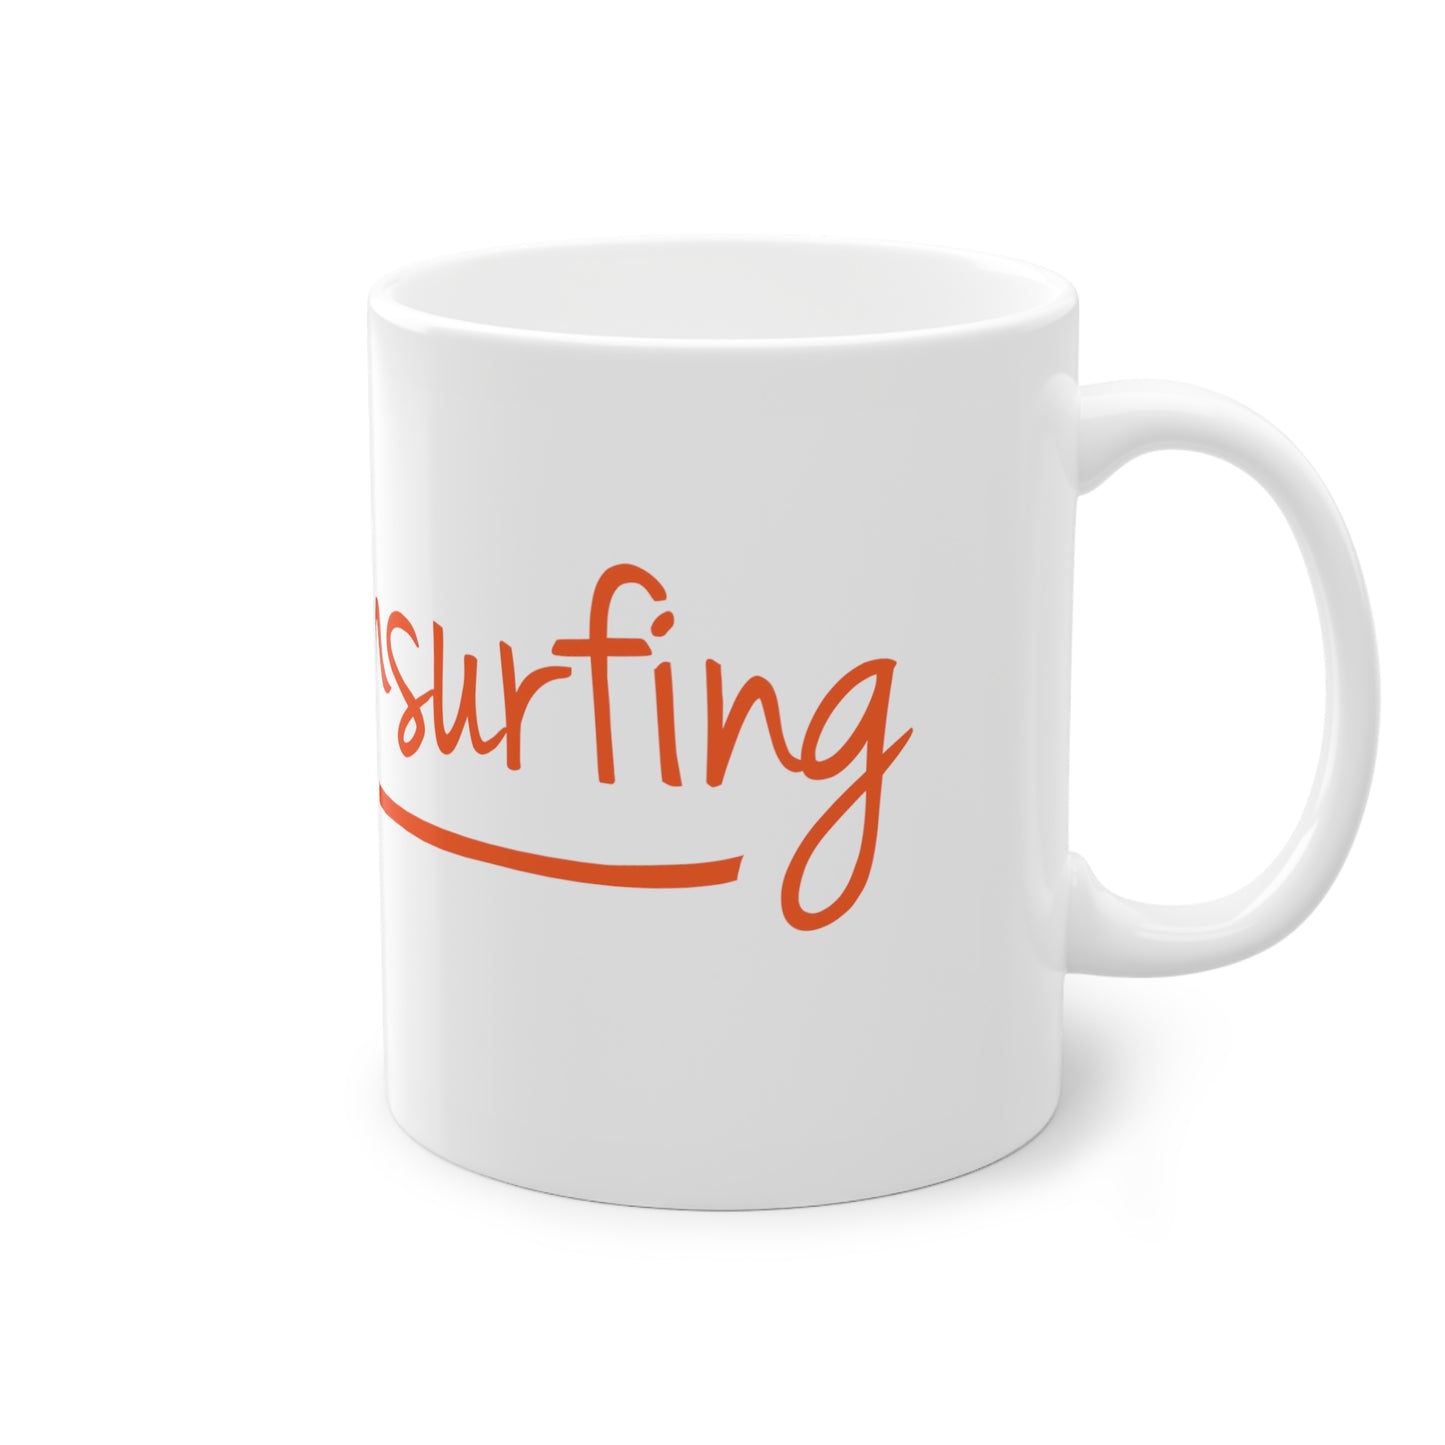 The Couchsurfing Mug